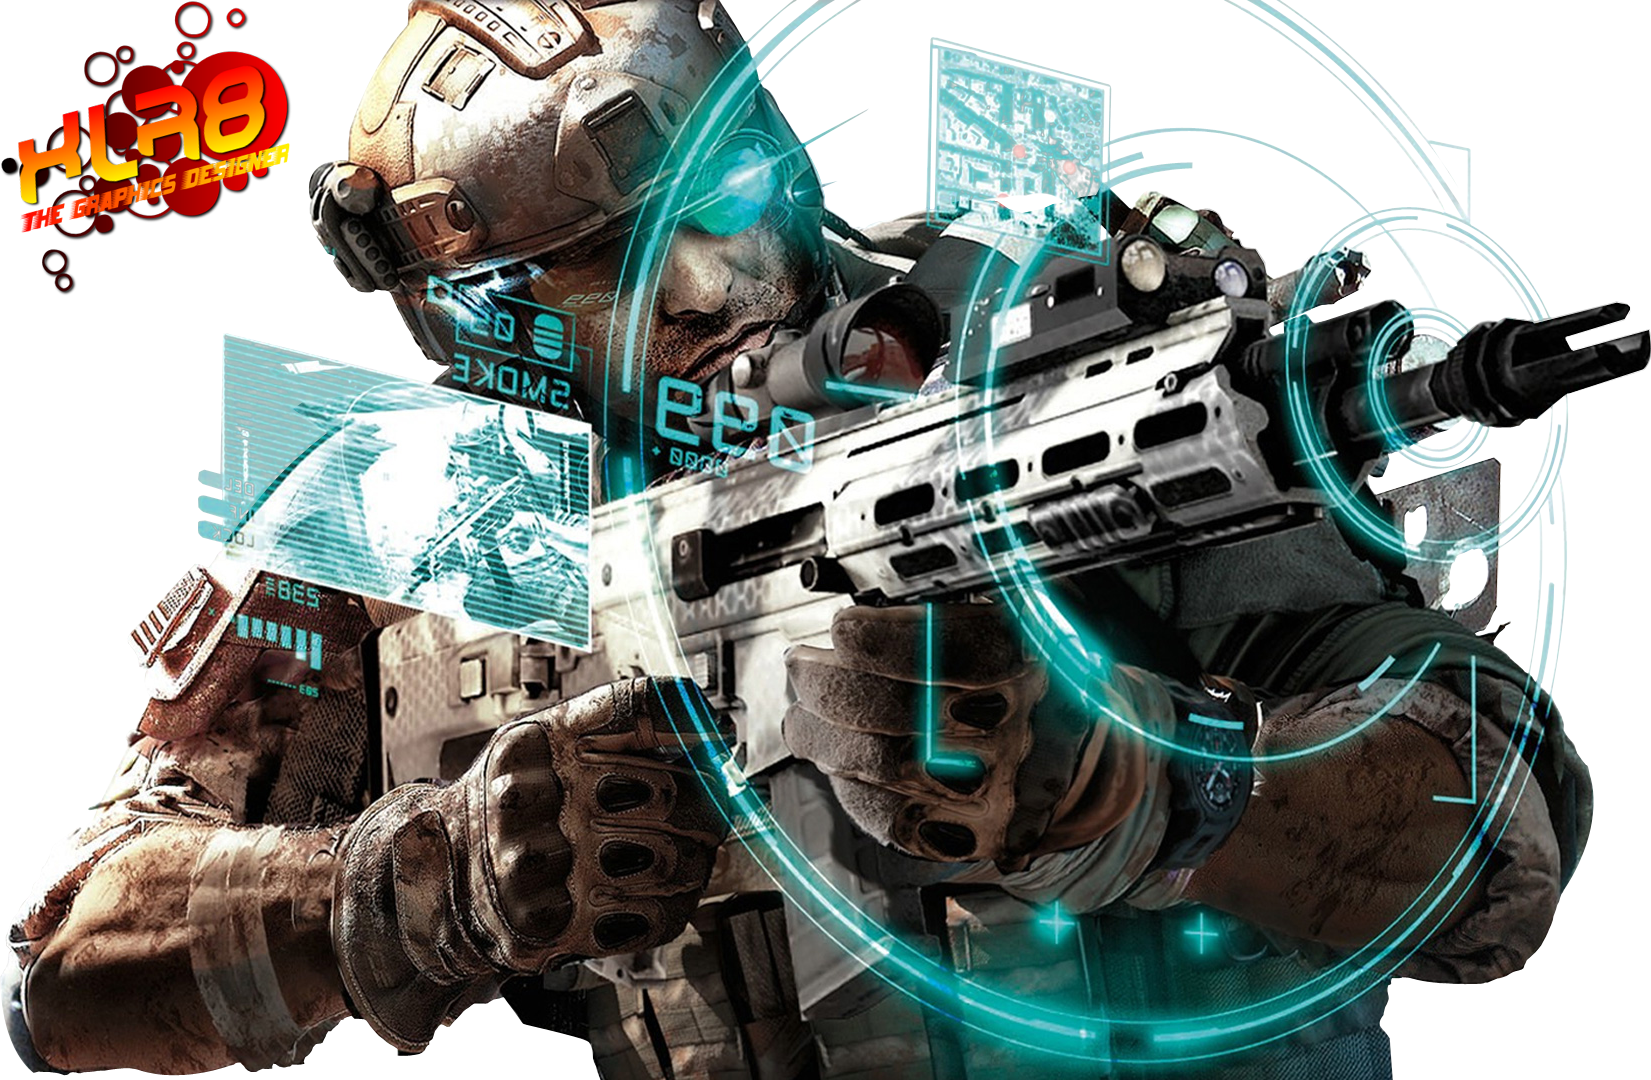 ghost_recon_render_1_by_xlr8gfx-d55b0ad.png